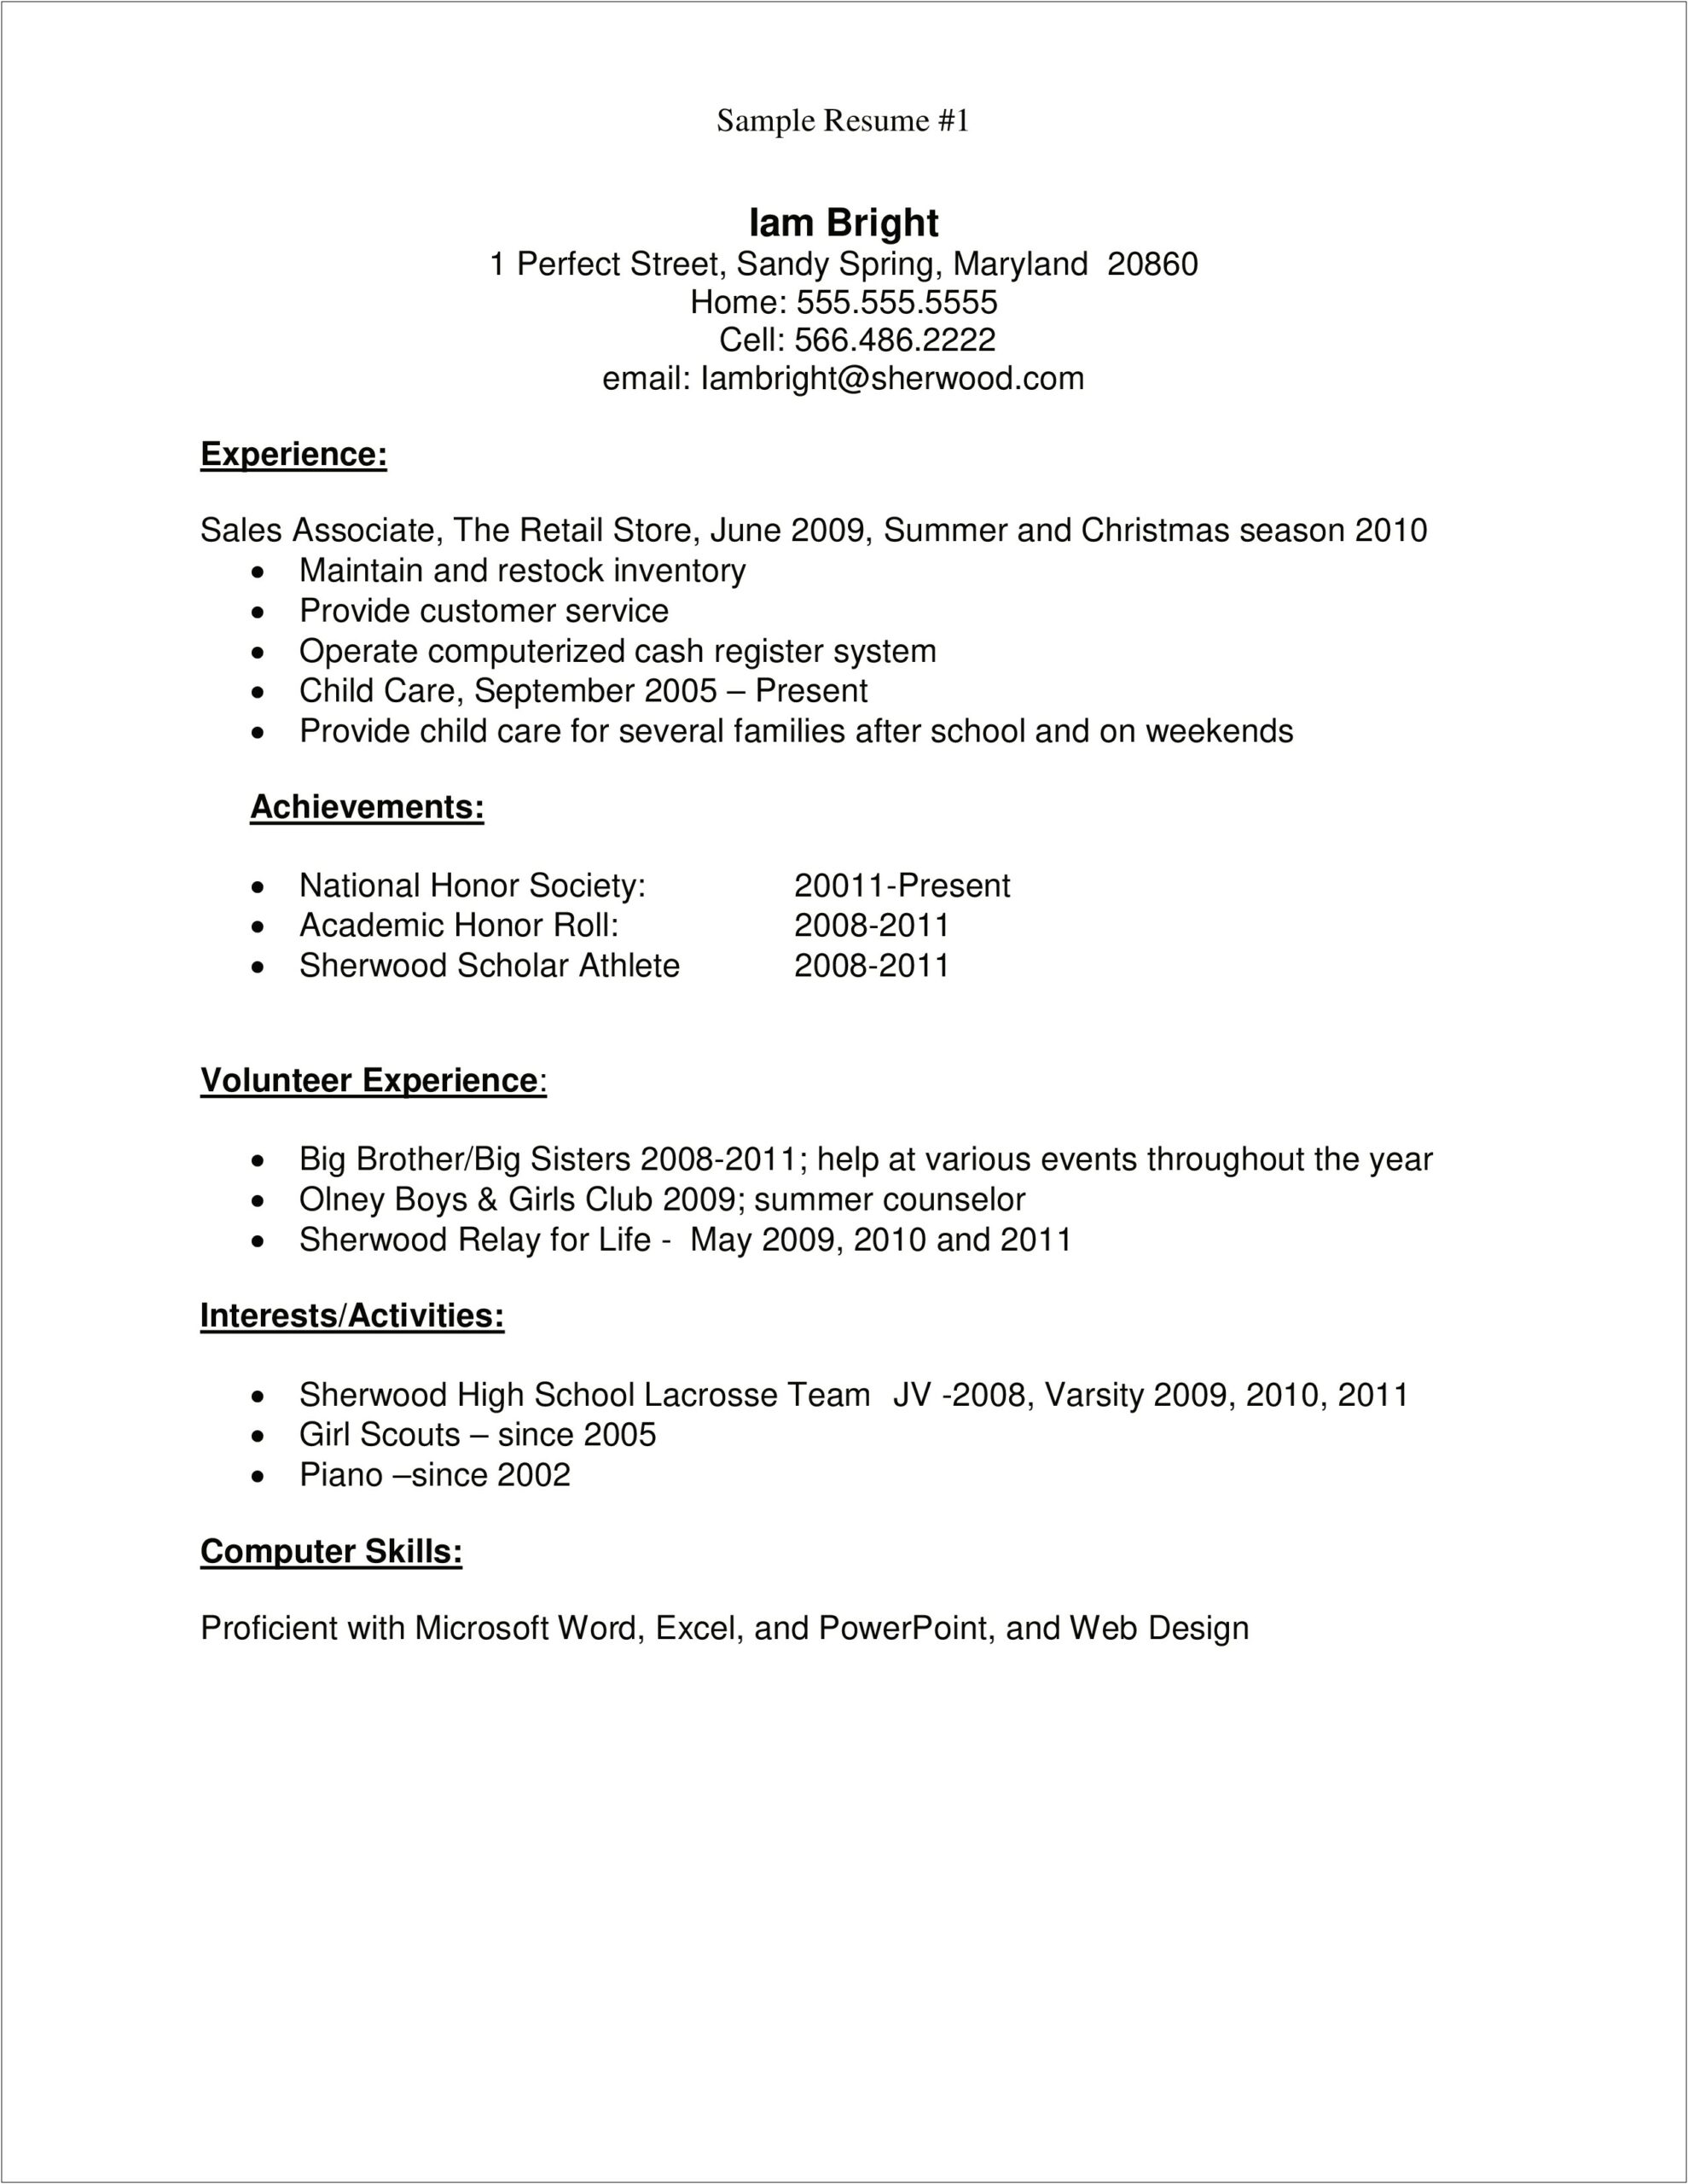 Resume For Teenagers For First Job